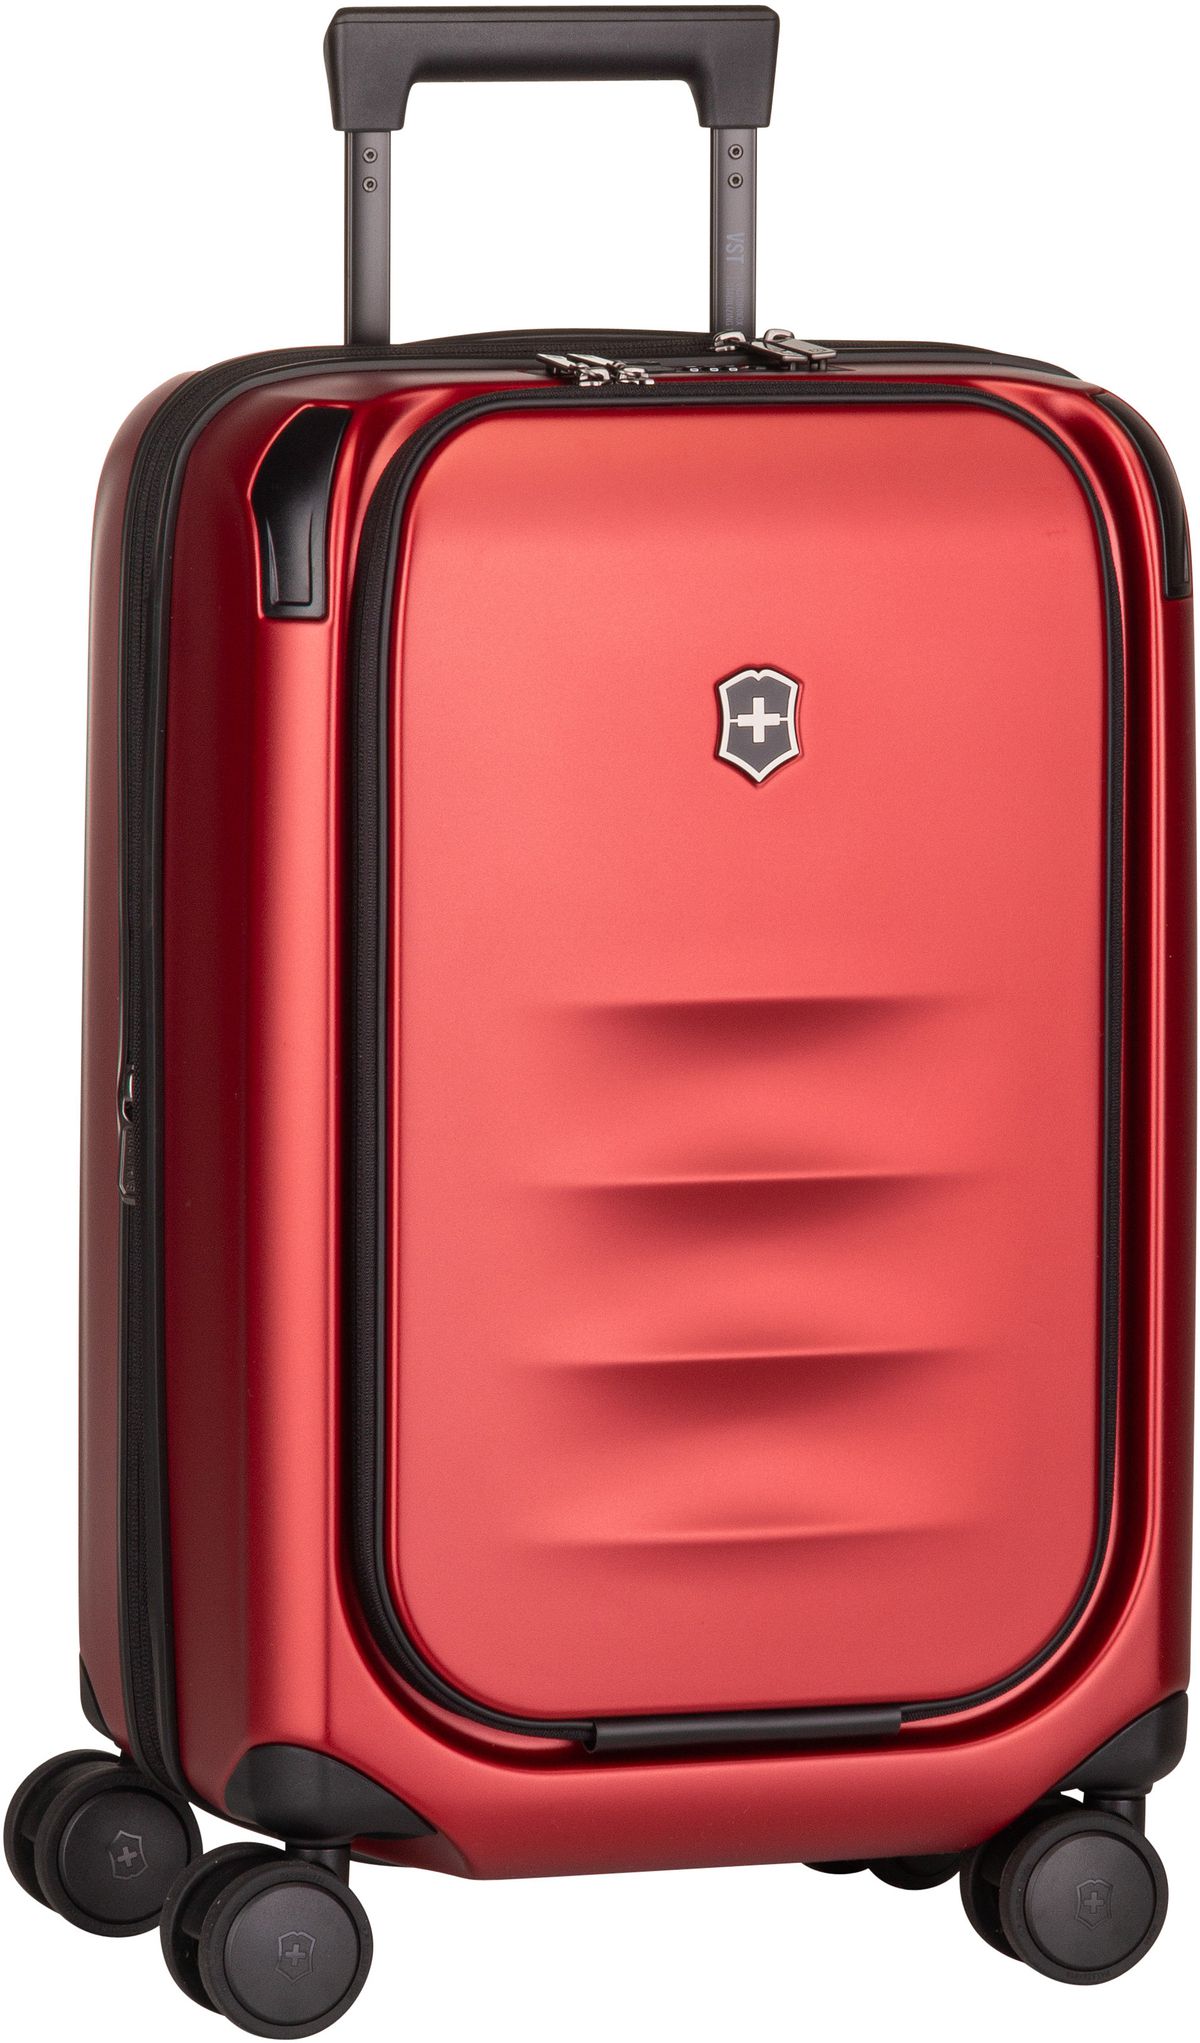 Victorinox Spectra 3.0 Exp. Frequent Flyer Carry-On  in Rot (37 Liter), Koffer & Trolley